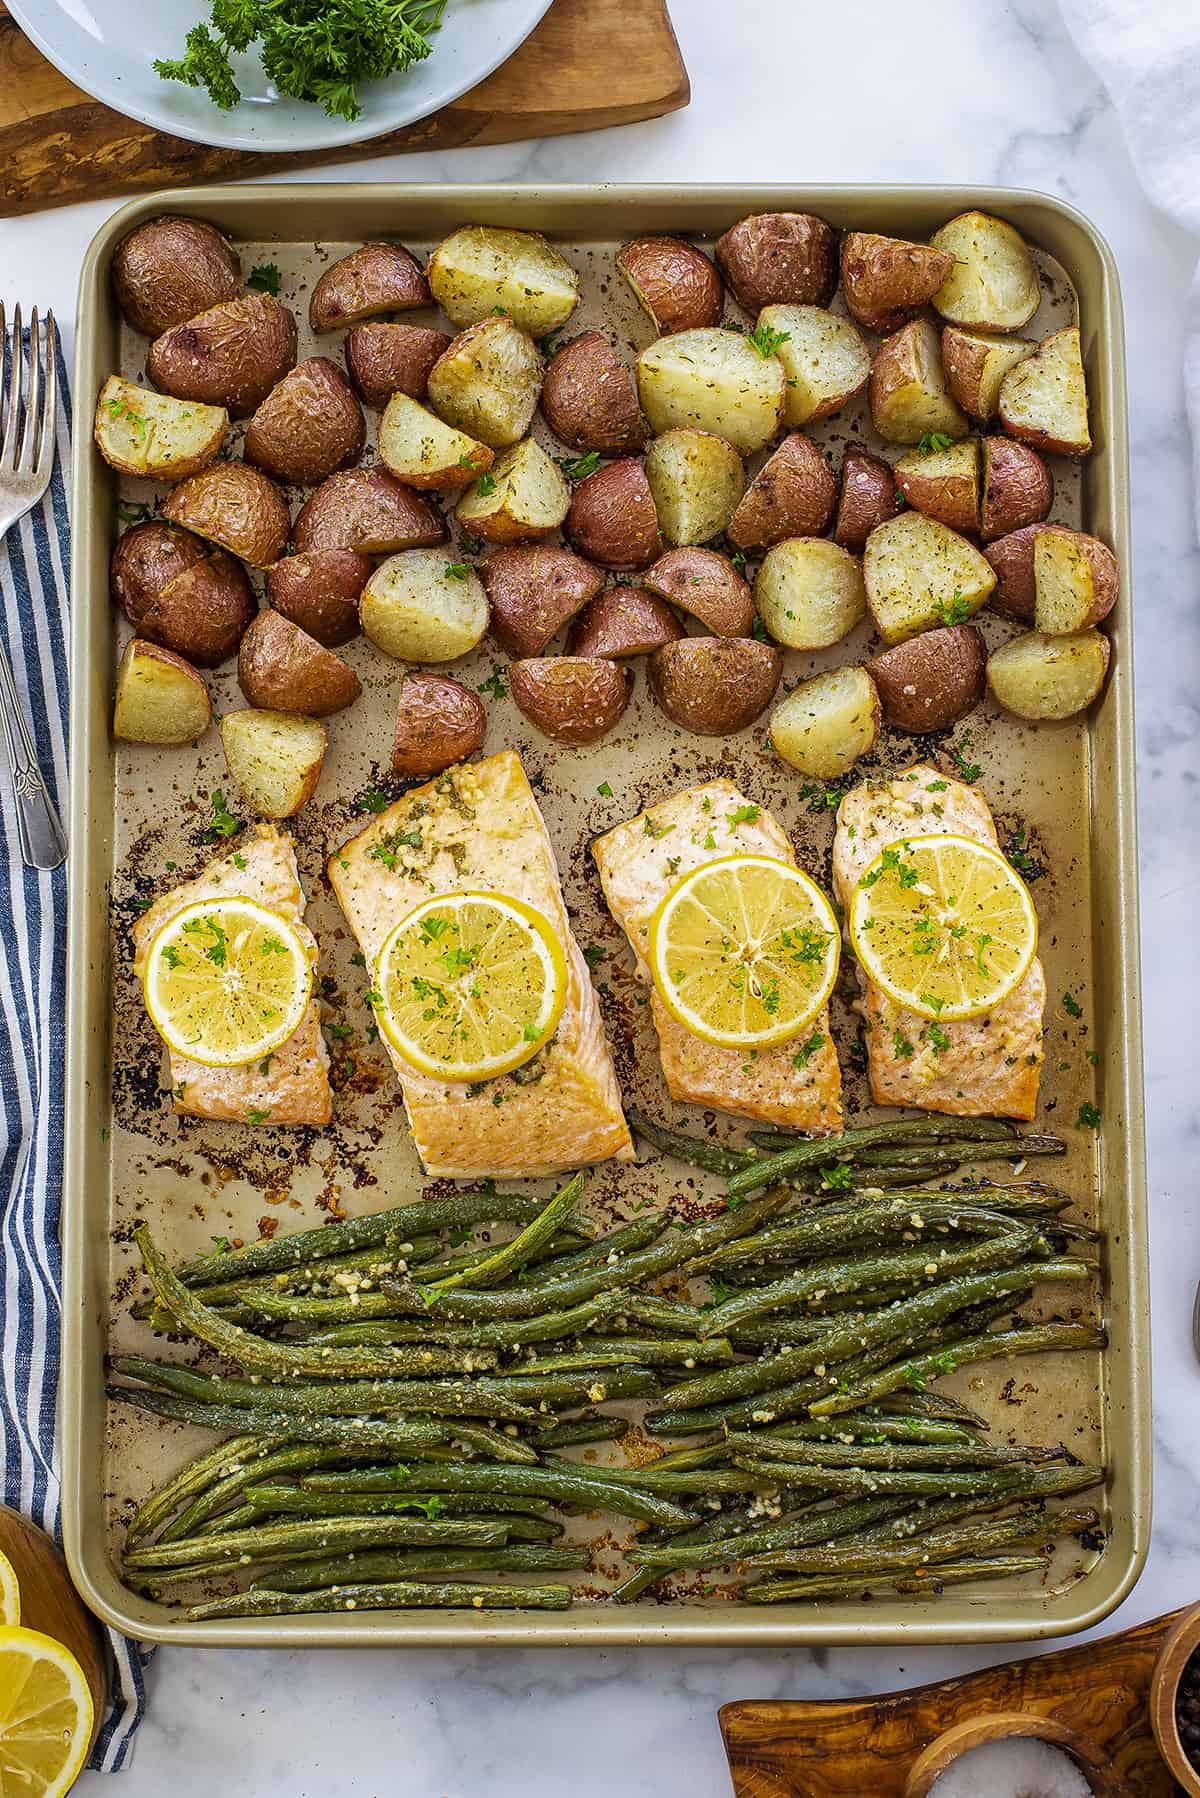 Overhead view of sheet pan with salmon, potatoes, and green beans.